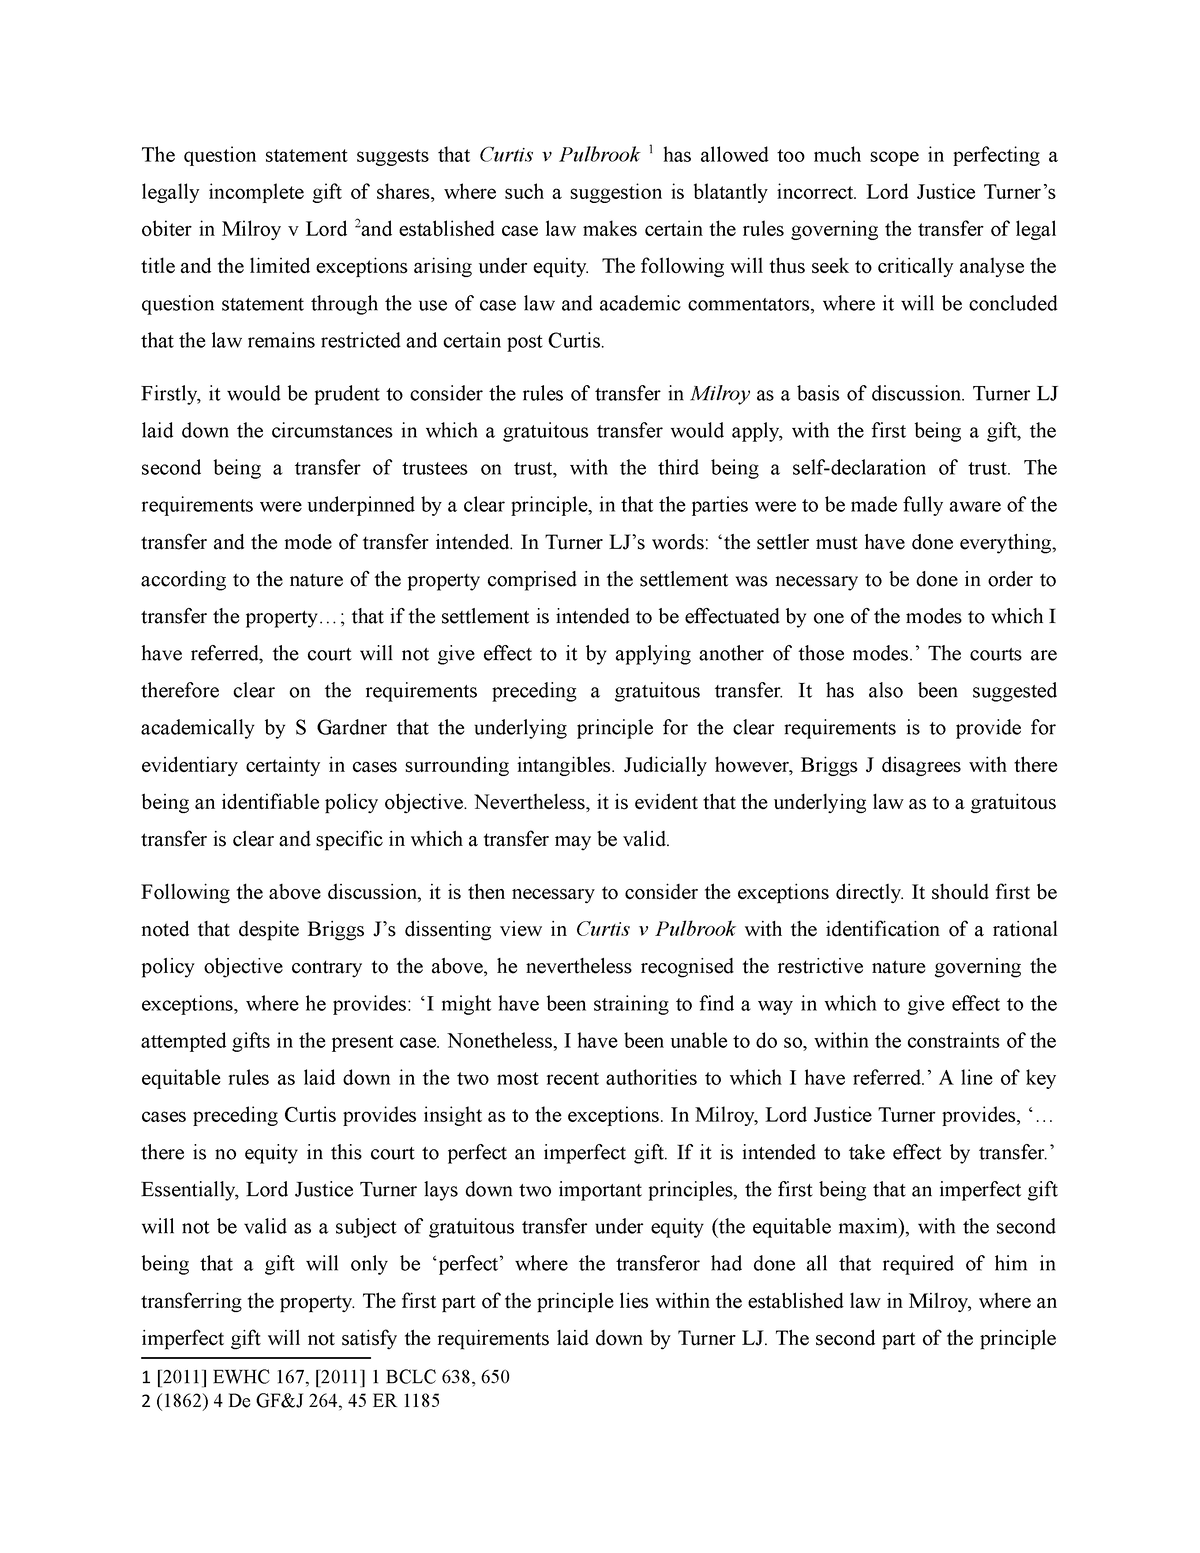 Curtis v Pulbrook essay - The question statement suggests that Curtis v ...